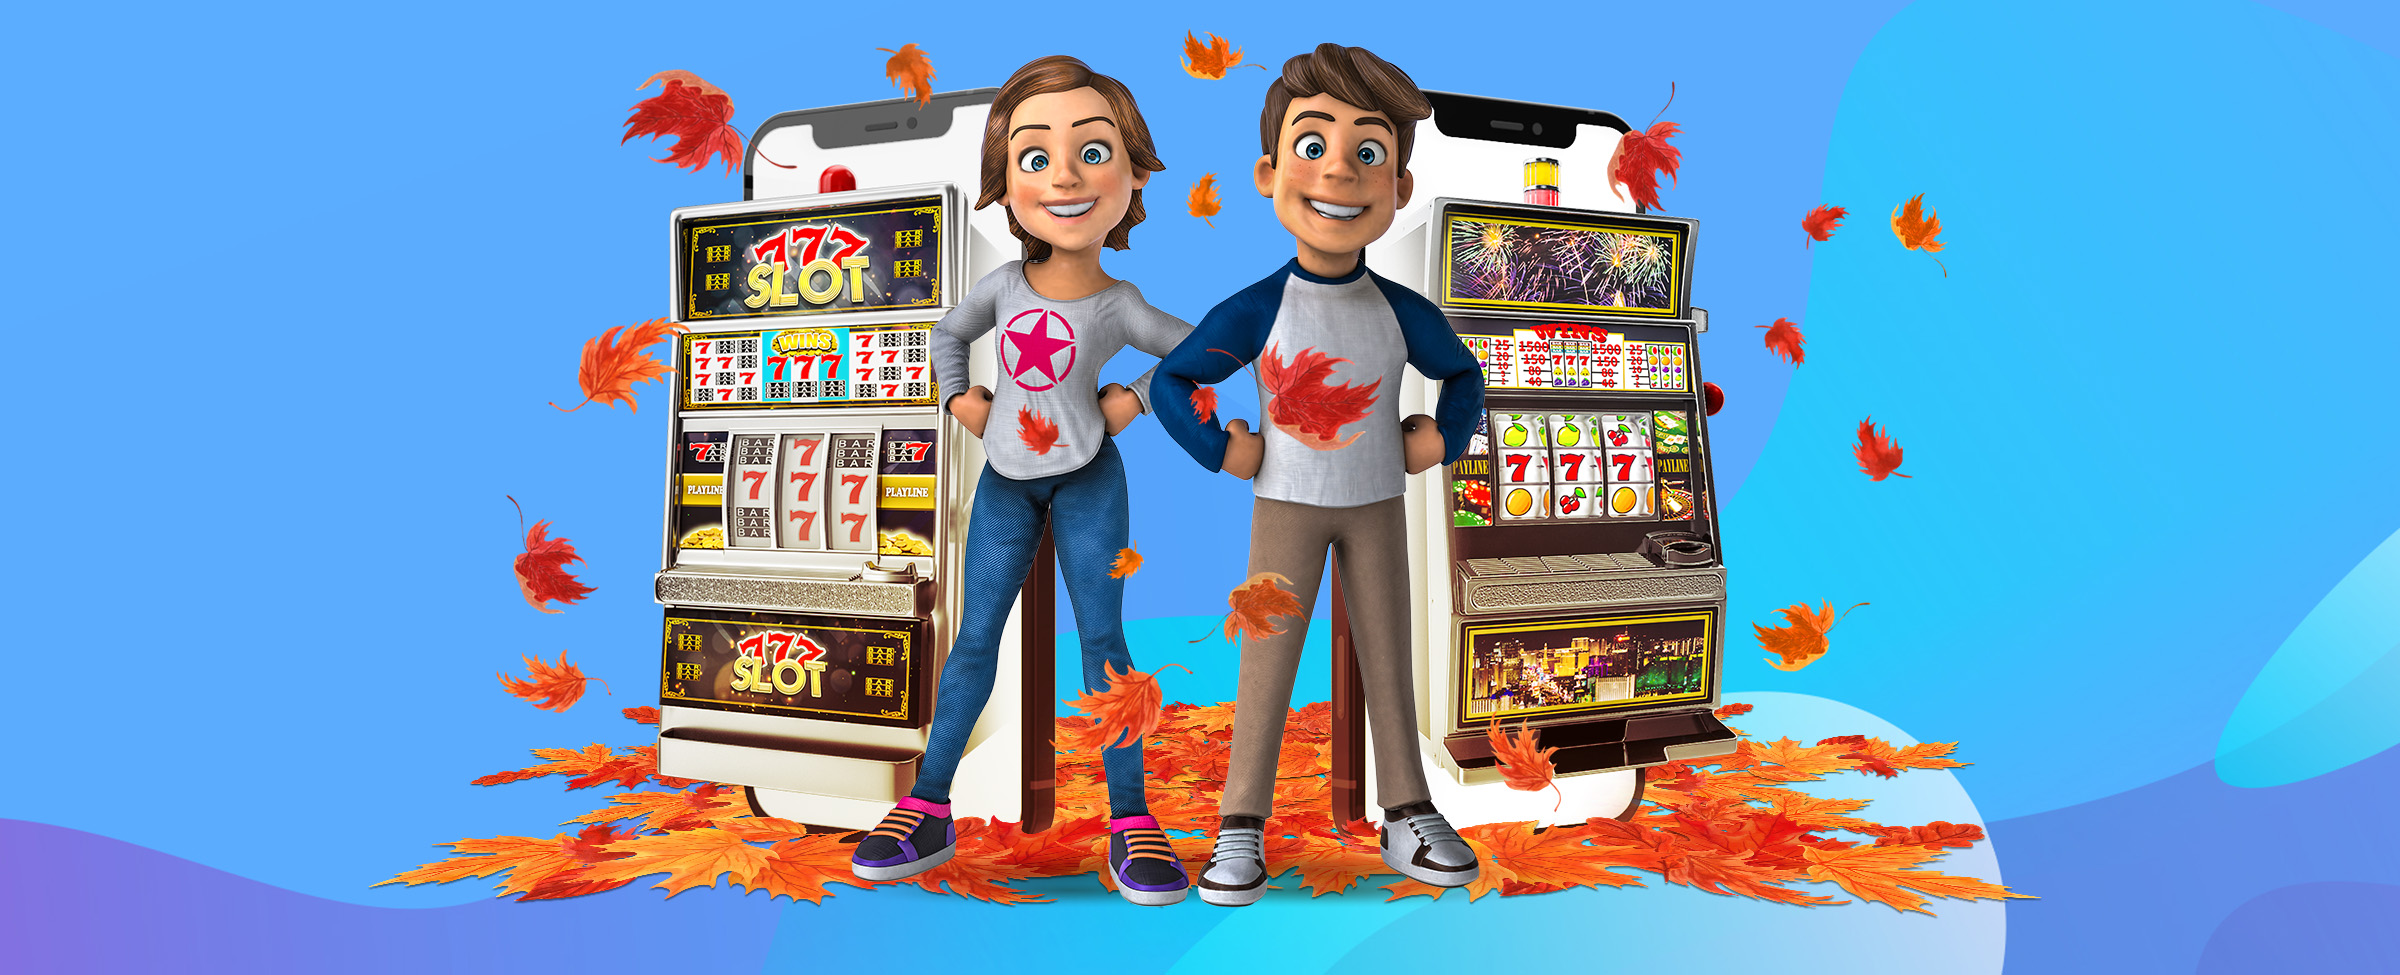 Characters in front of online slots machines with fall leaves on the ground around them.